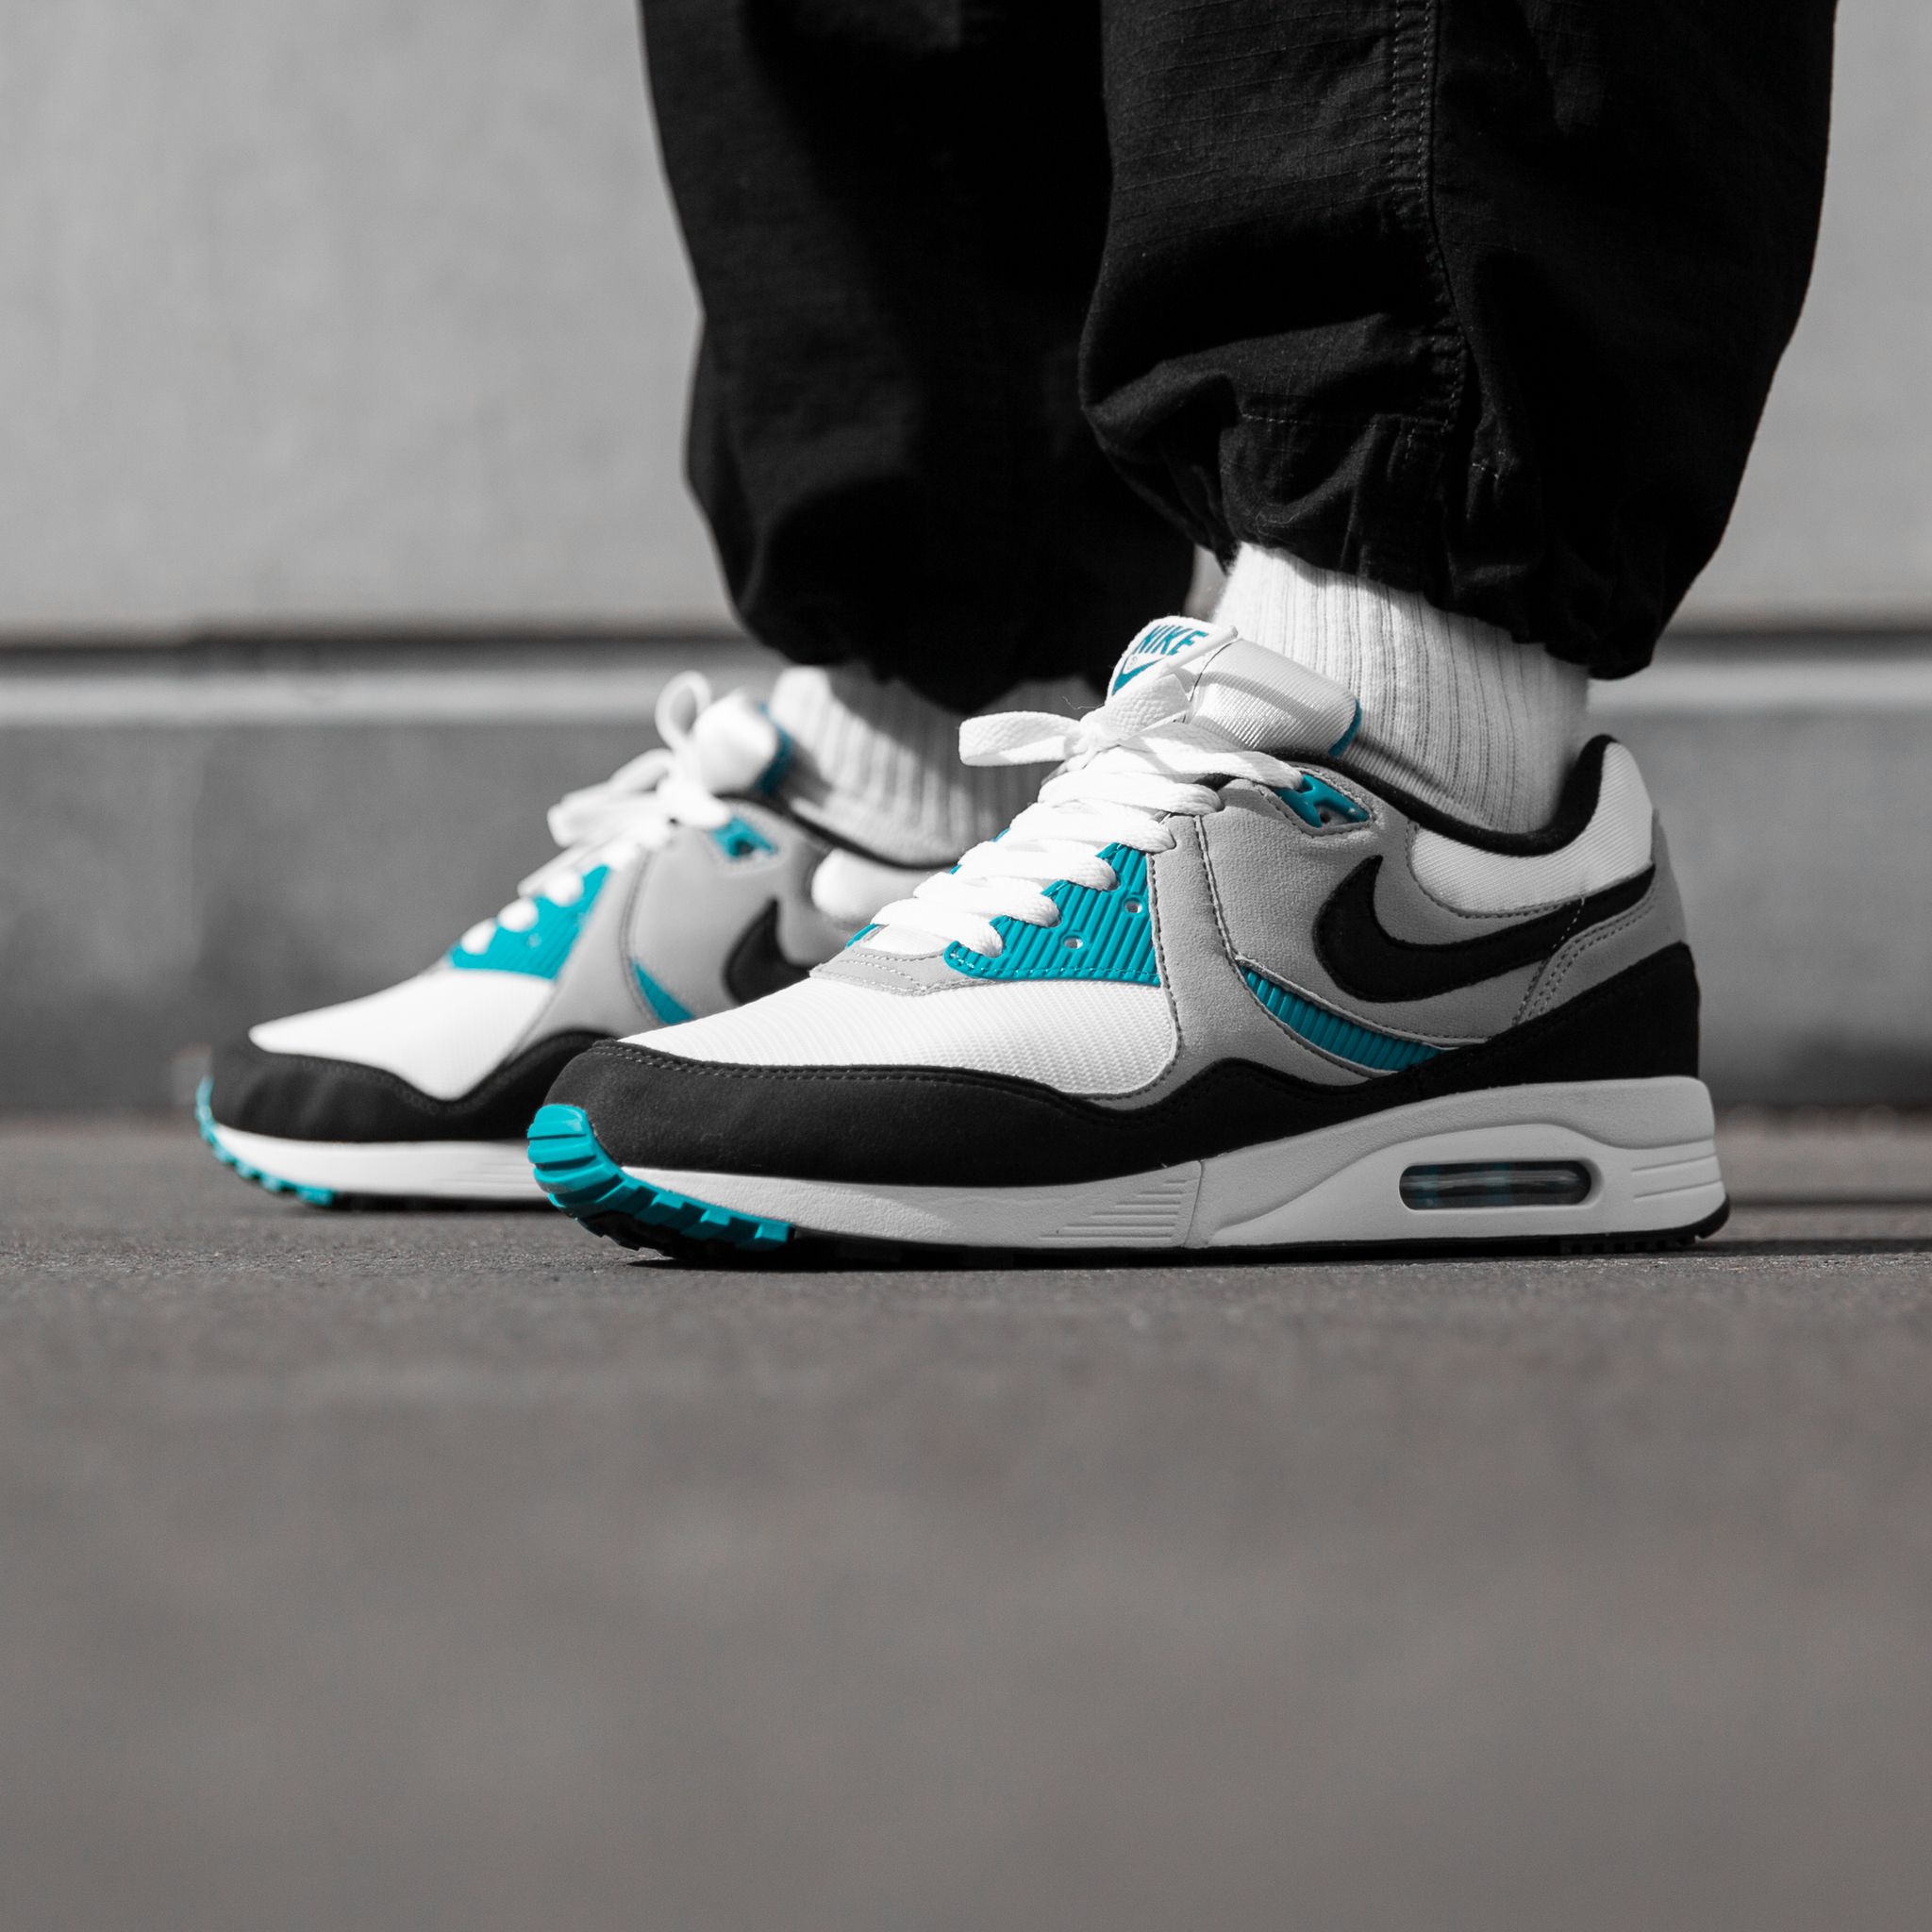 Noroeste embudo Consumir Titolo on Twitter: "a classic from 1989 is back 💫 Rediscover the Nike Air  Max Light in "White/Black-Wolf Grey-Spirit Teal" L I N K ➡️  https://t.co/if68pCu4gz US 7 (40) - US 12 (